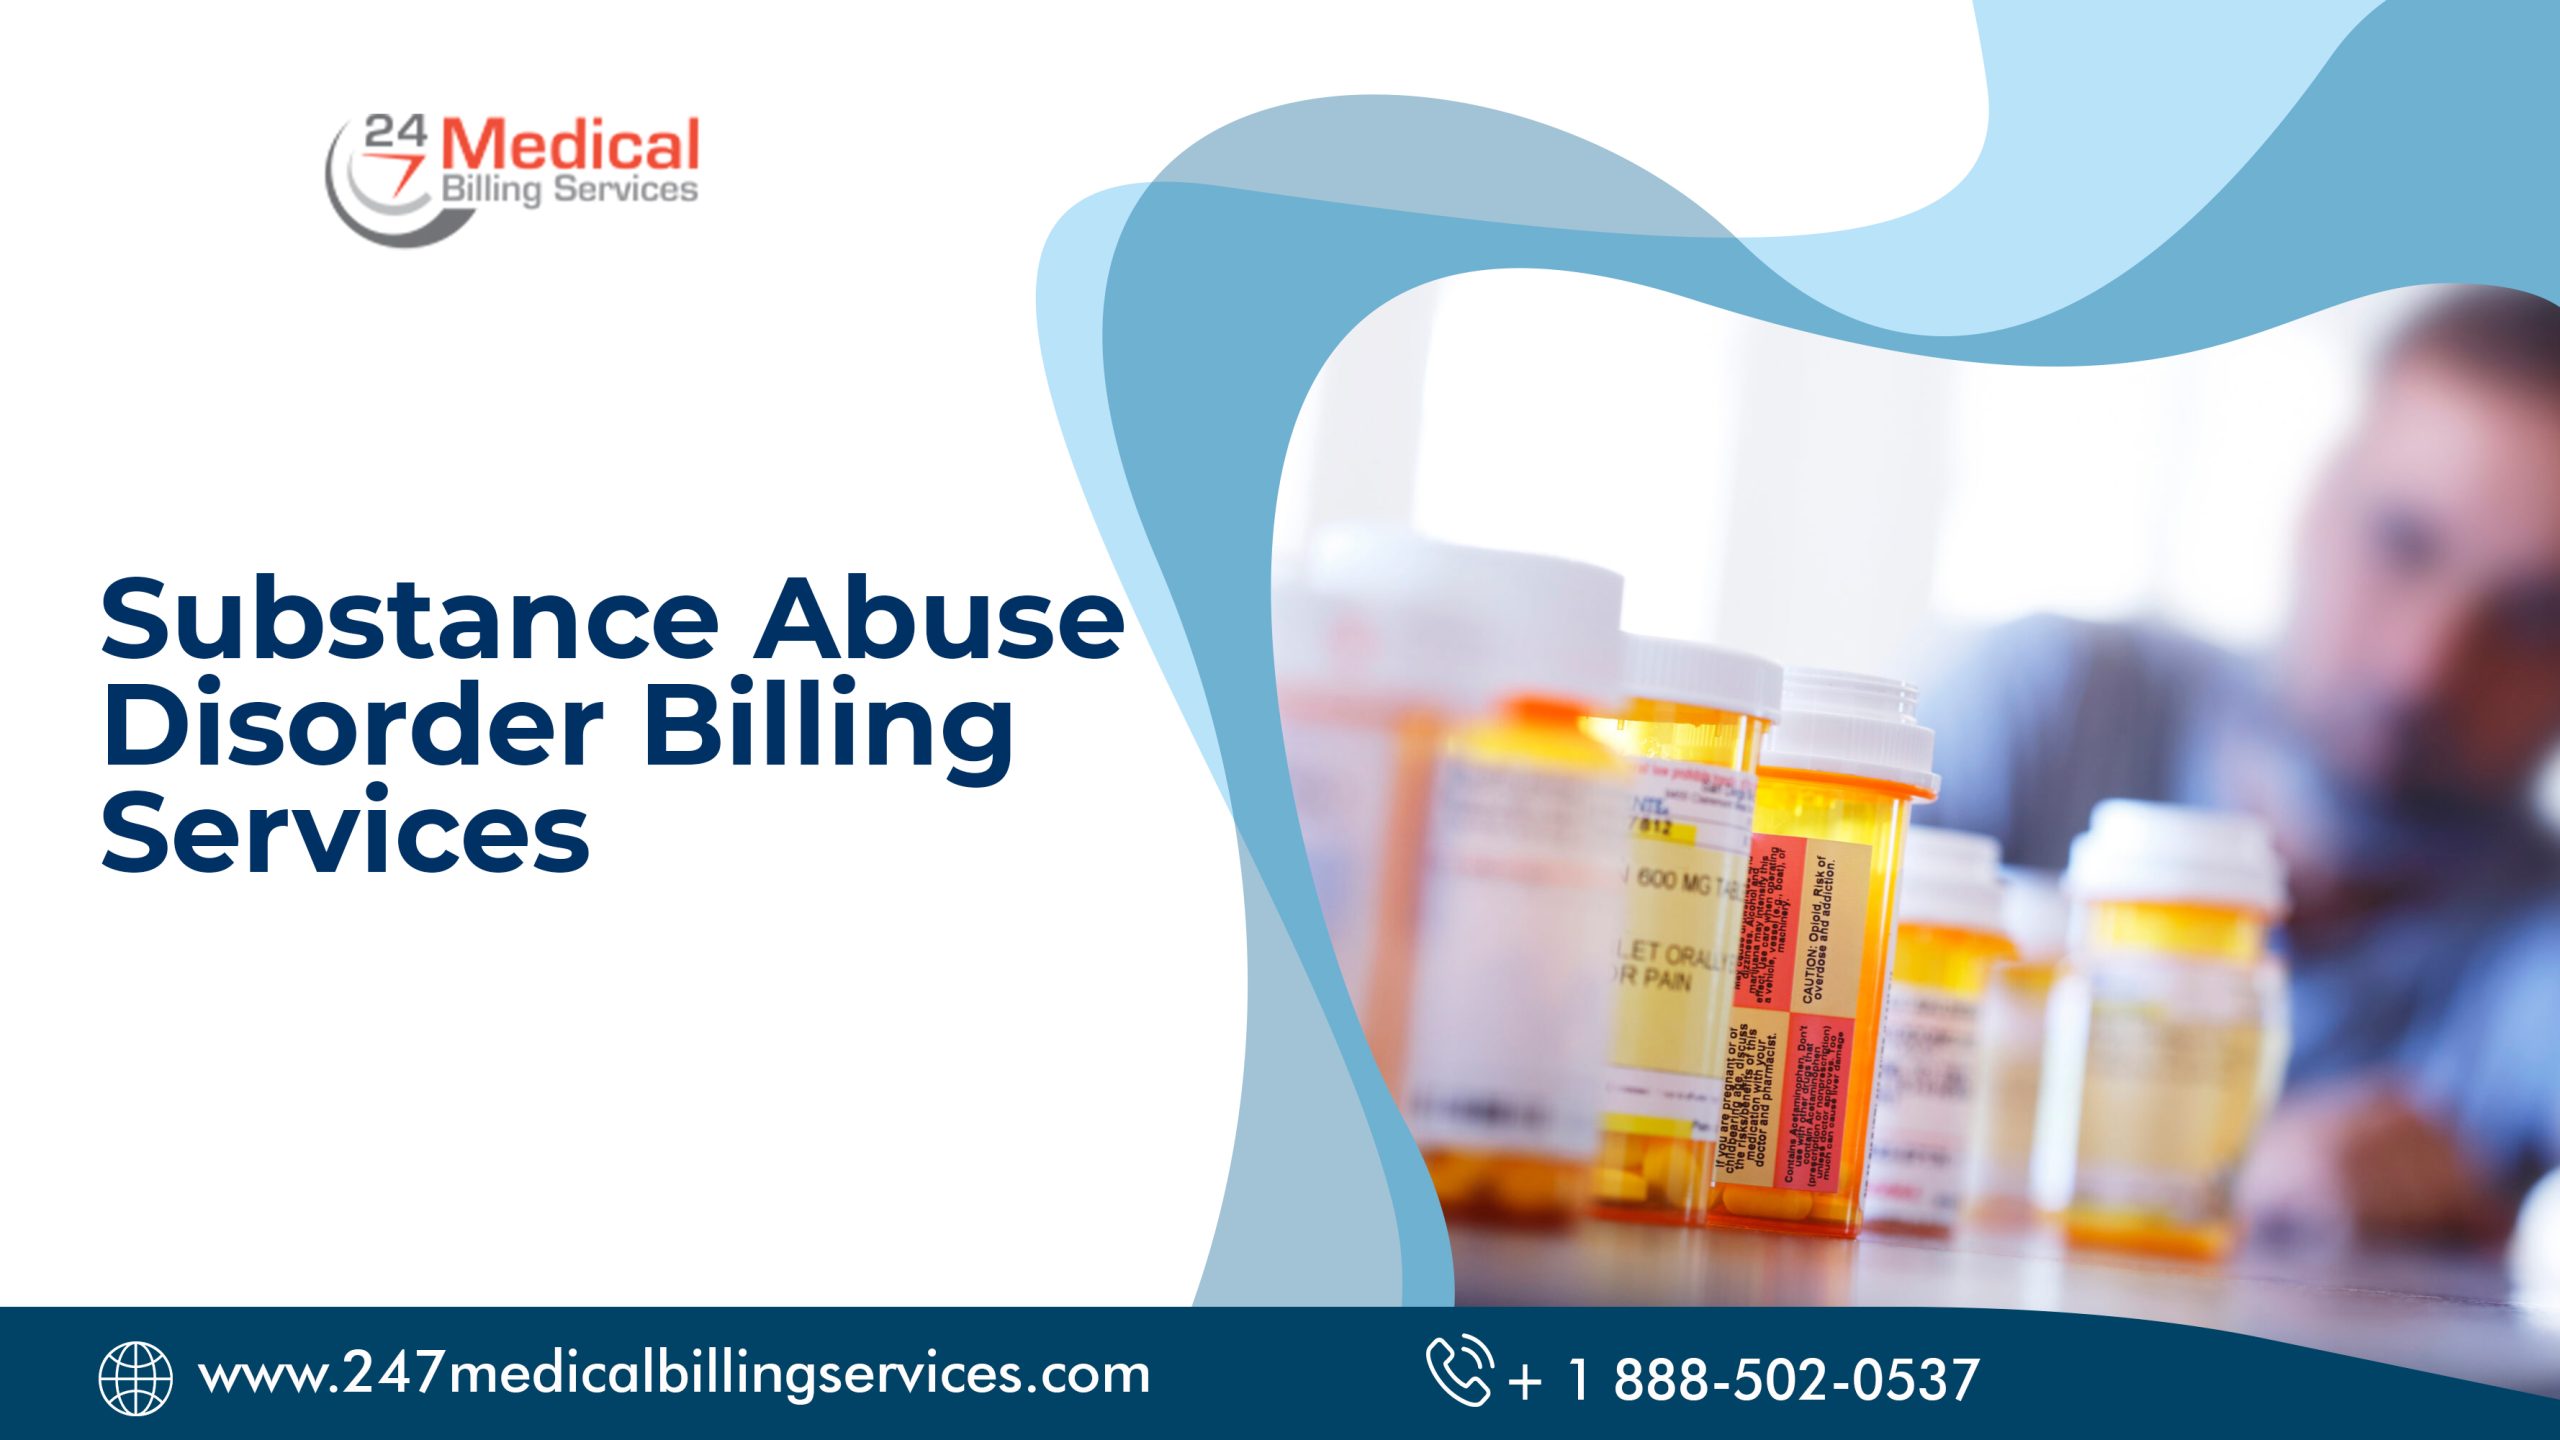  Substance Abuse Disorder Billing Services